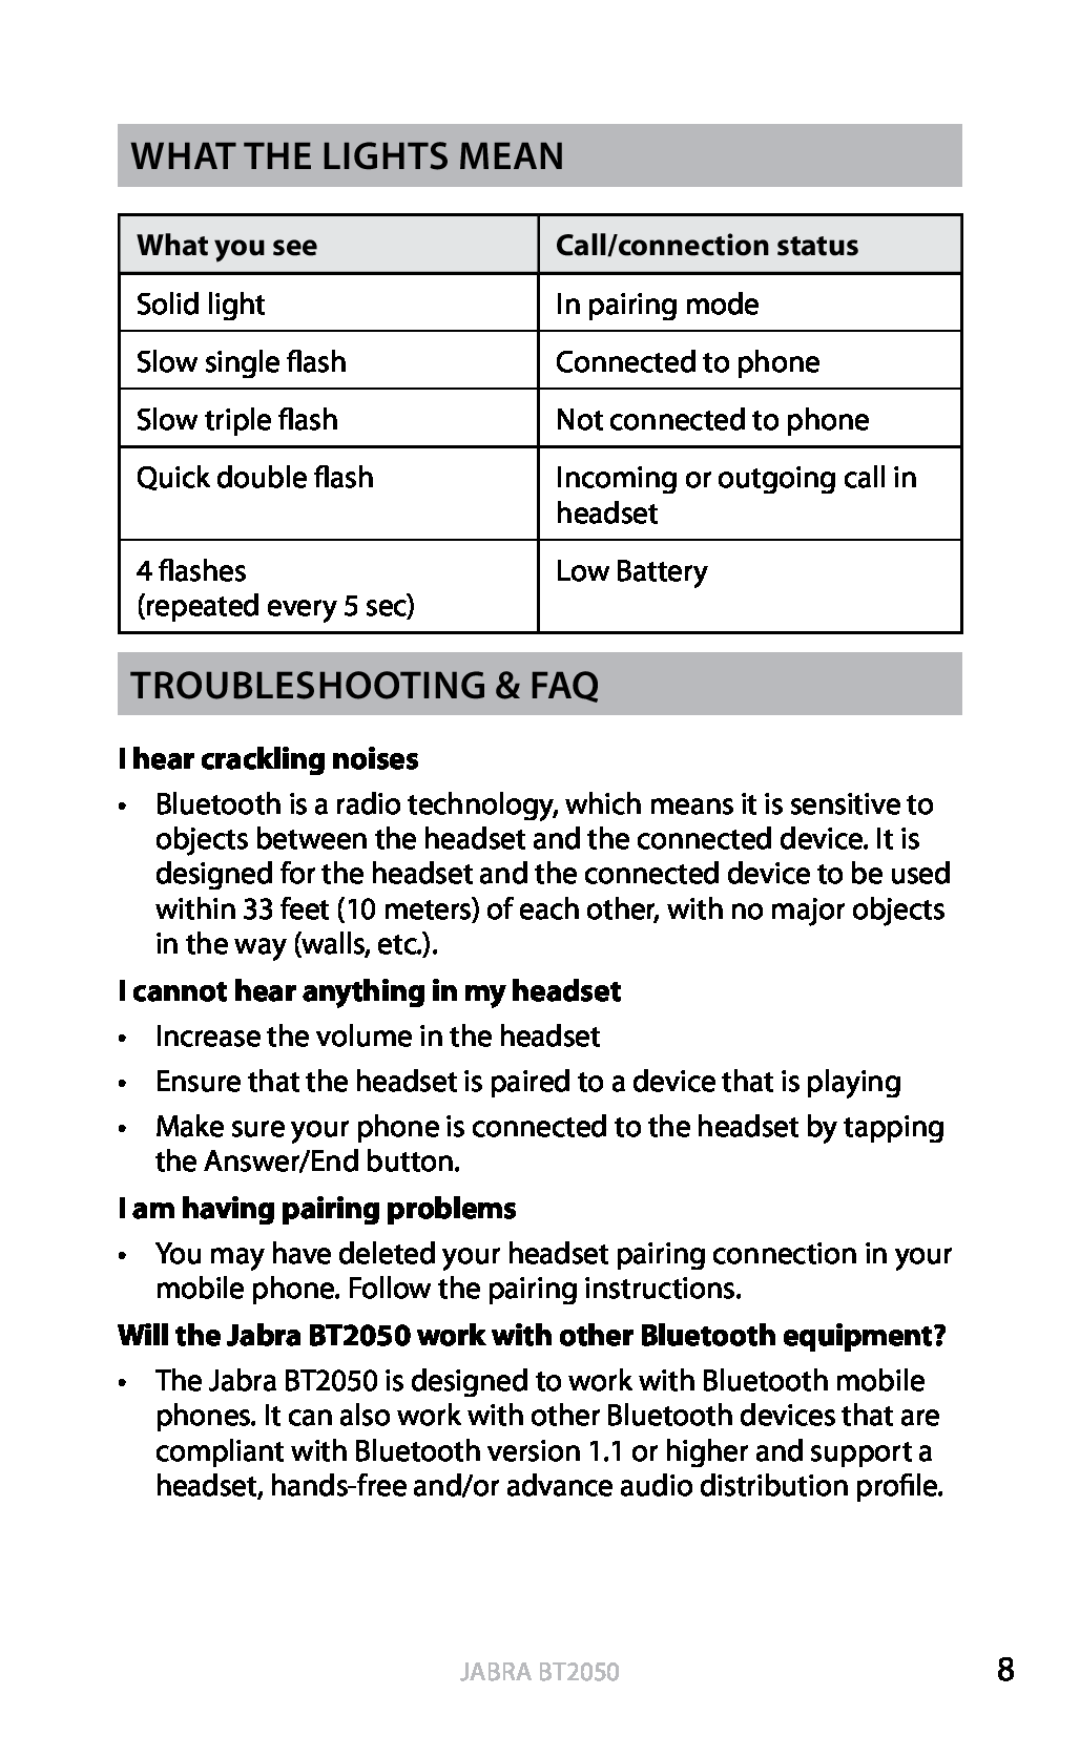 Jabra BT2050 What the lights mean, Troubleshooting & FAQ, Call/connection status, I hear crackling noises, english 